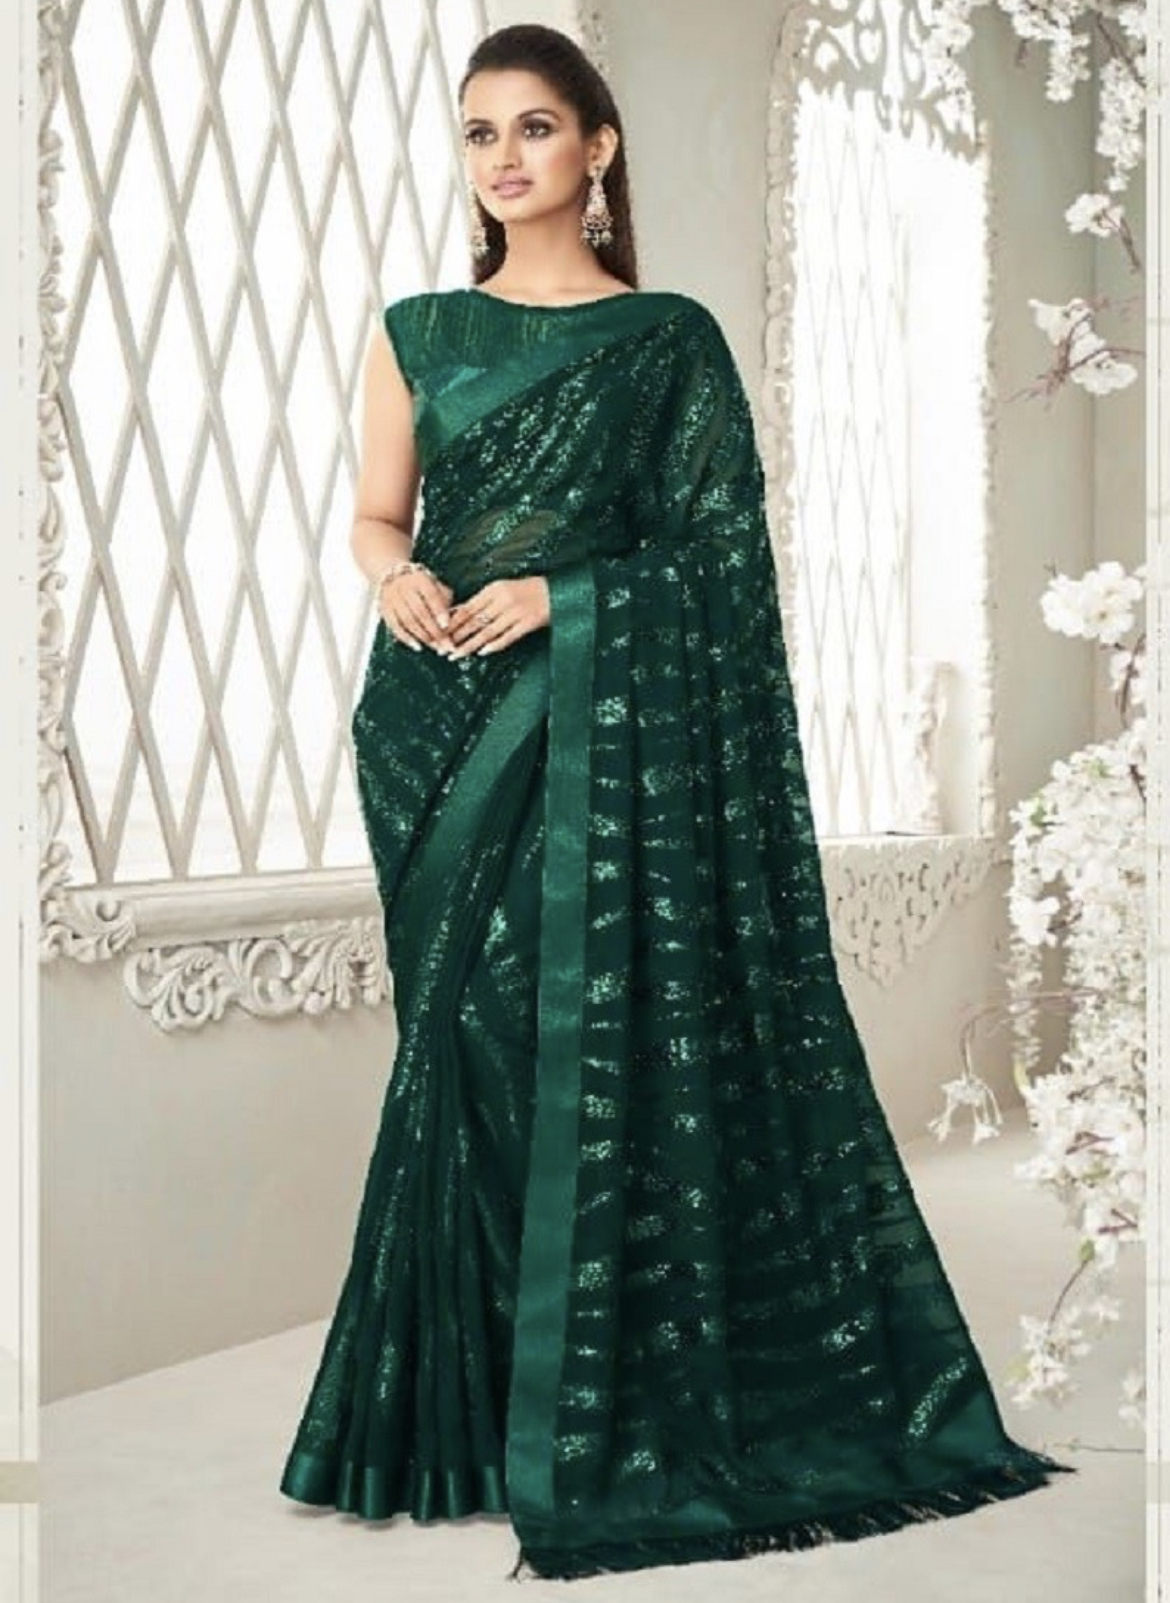 Green Fancy Saree With Fringe Detail - Sarees Designer Collection